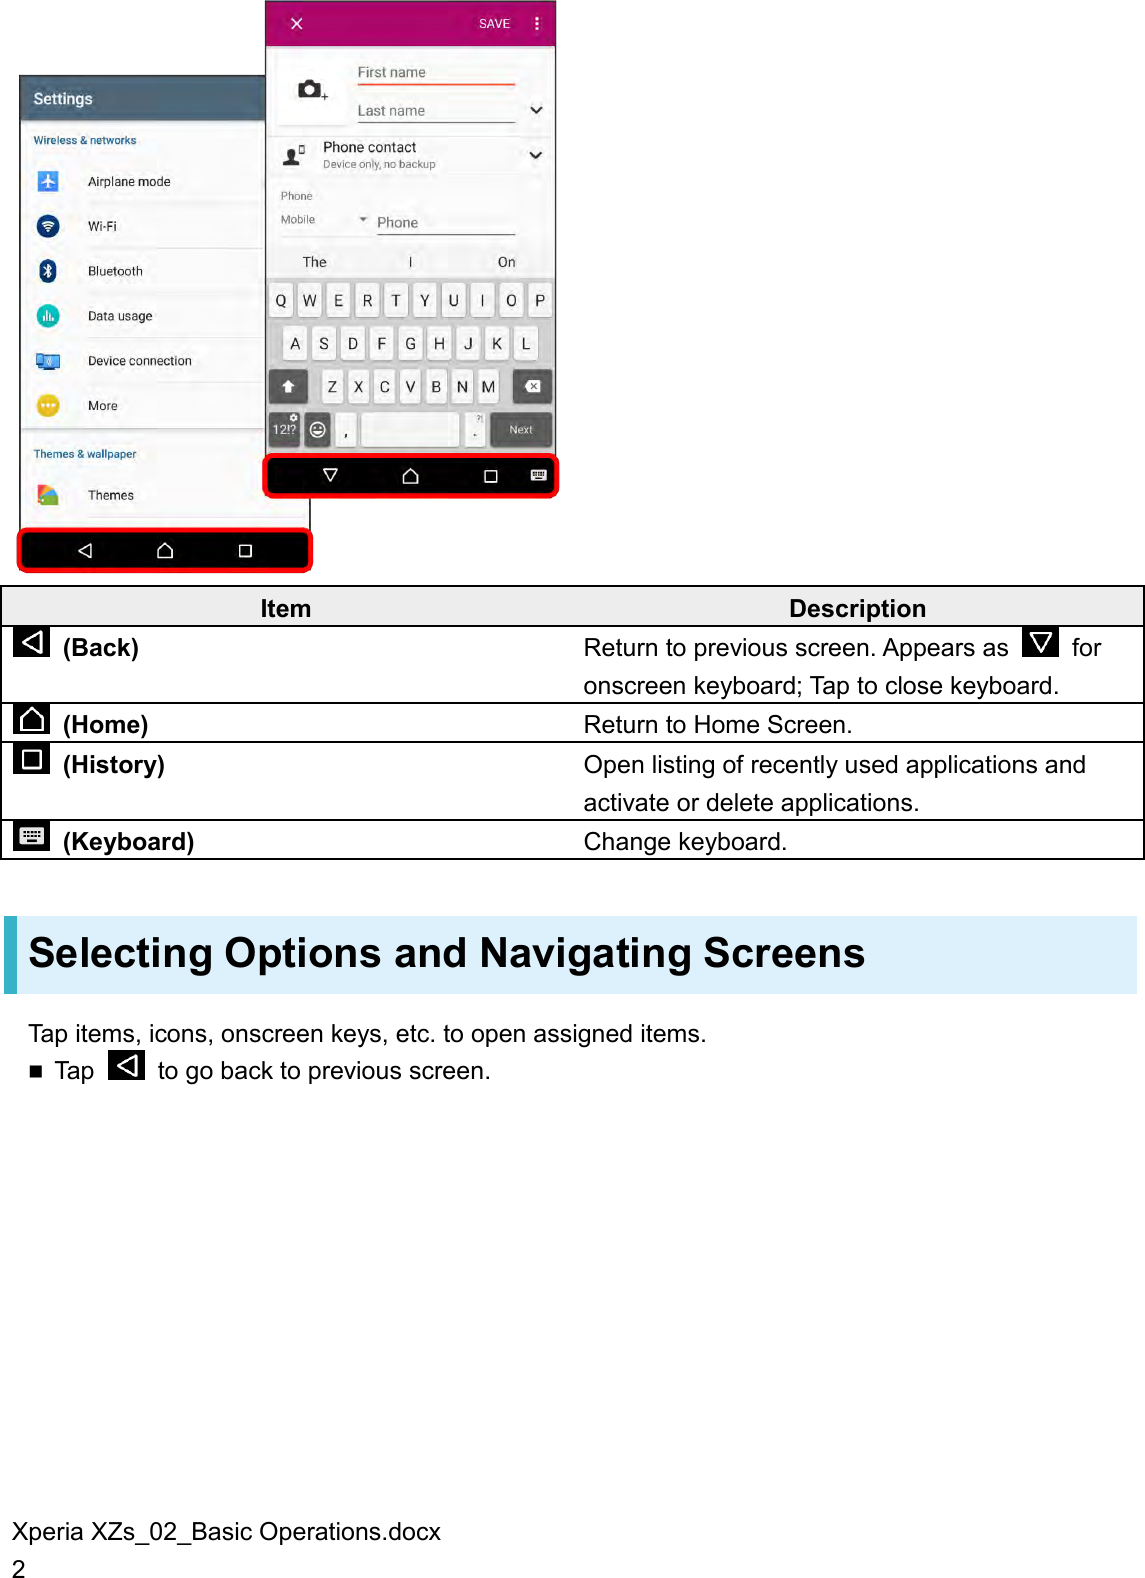 Xperia XZs_02_Basic Operations.docx 2  Item Description   (Back) Return to previous screen. Appears as    for onscreen keyboard; Tap to close keyboard.   (Home) Return to Home Screen.   (History) Open listing of recently used applications and activate or delete applications.  (Keyboard) Change keyboard. Selecting Options and Navigating Screens Tap items, icons, onscreen keys, etc. to open assigned items.  Tap    to go back to previous screen. 